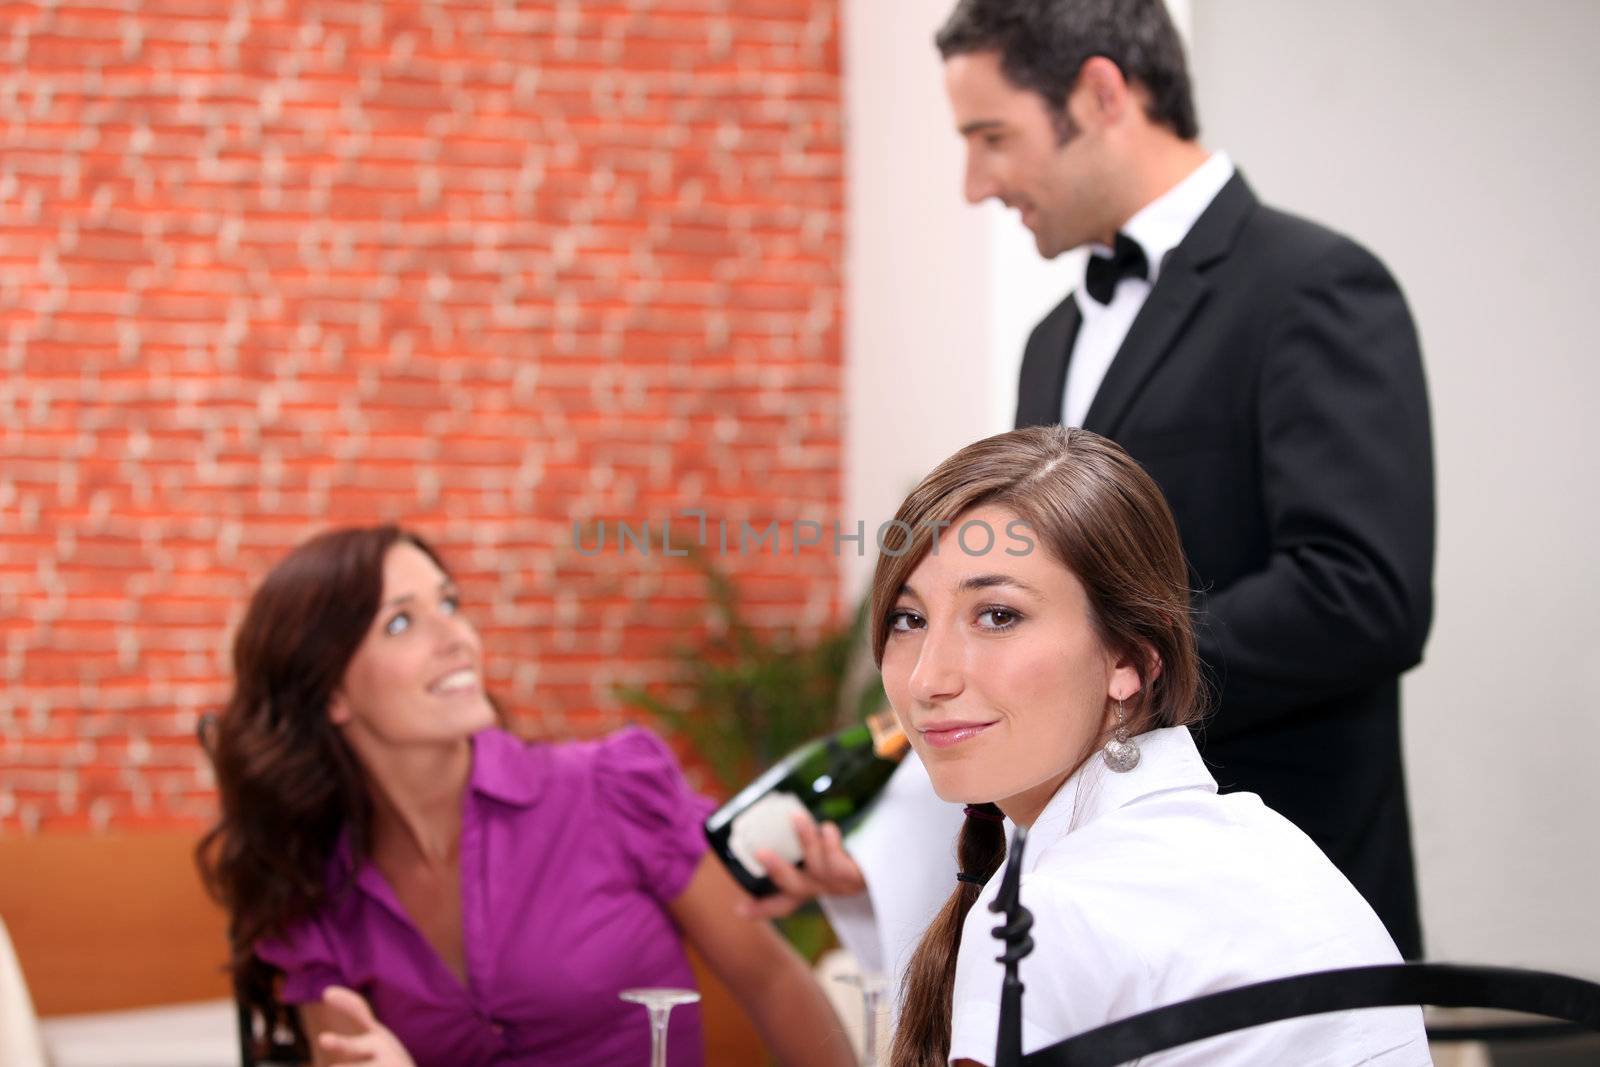 wine waiter showing a sparkling wine bottle to customers by phovoir